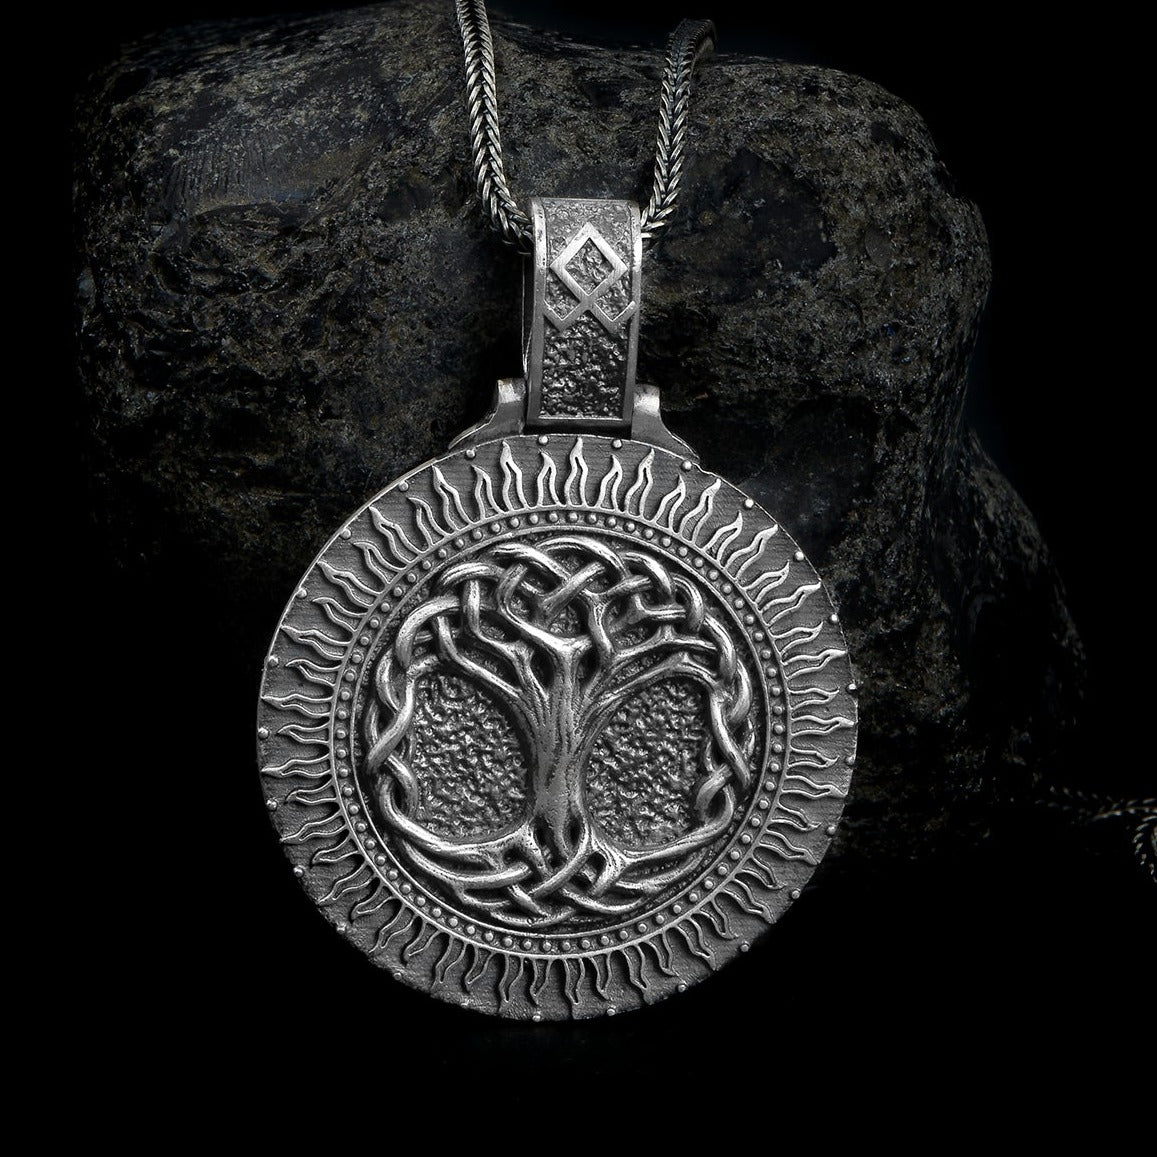 Sterling silver pendant necklace featuring the detailed Yggdrasil, the World Tree from Norse mythology, symbolizing life, interconnectedness, and cosmic balance.